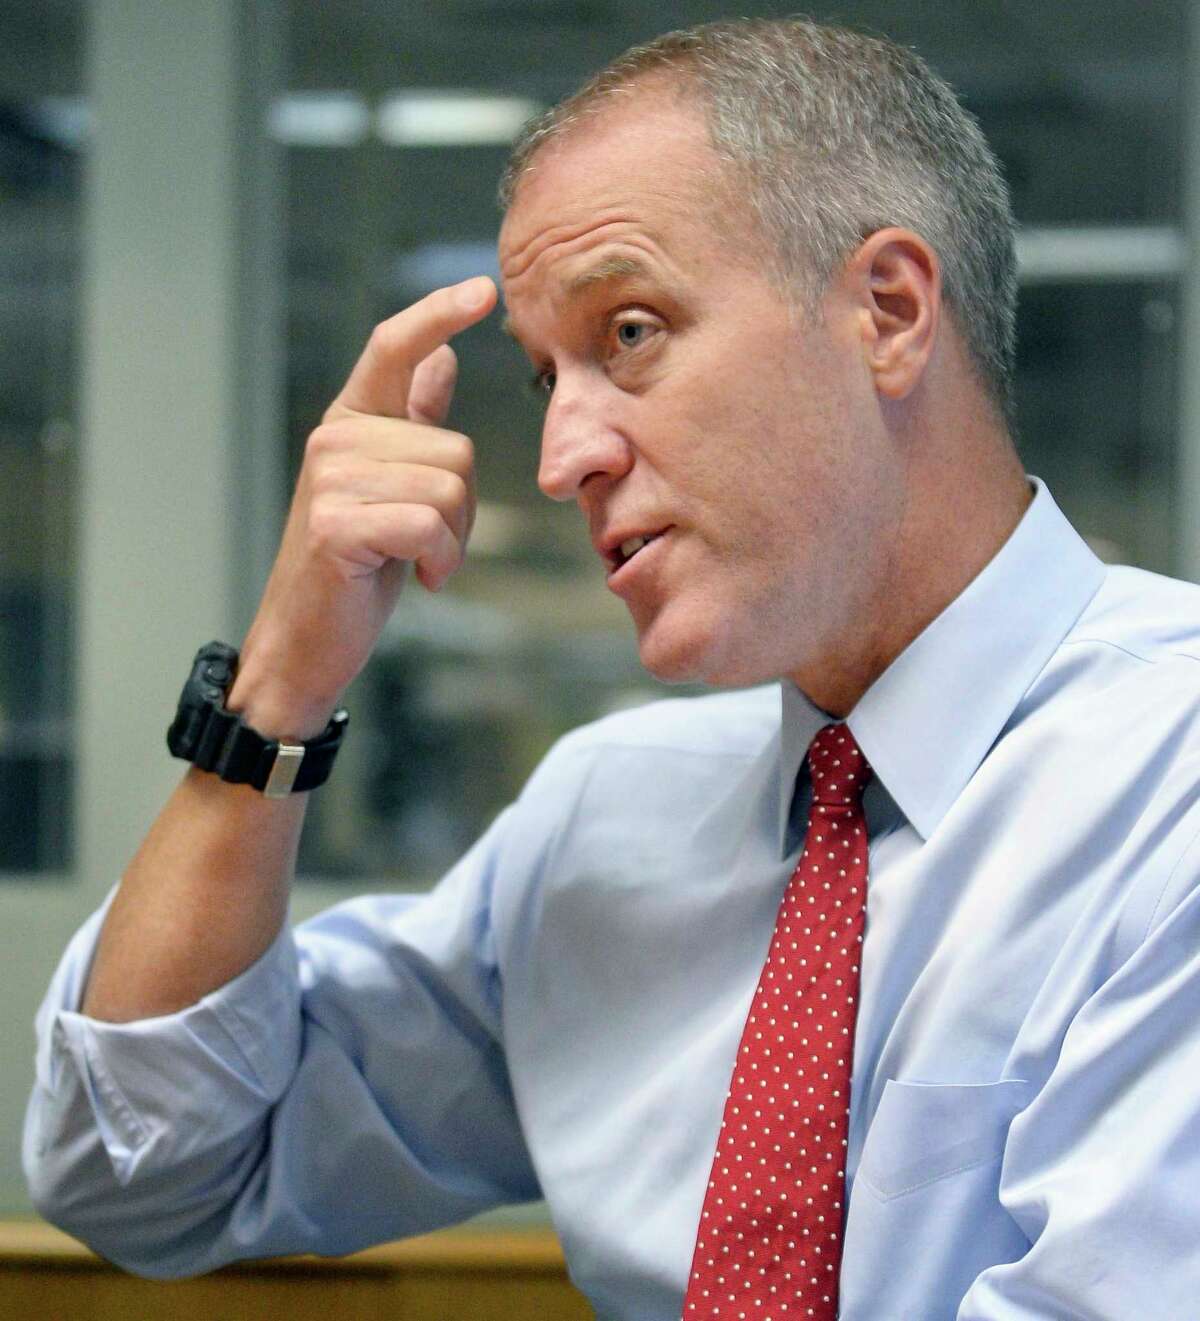 Democratic candidate for New York attorney general, U.S. Rep. Sean Patrick Maloney meets with the Times Union editorial board Thursday August 16, 2018 in Colonie, NY. (John Carl D'Annibale/Times Union)